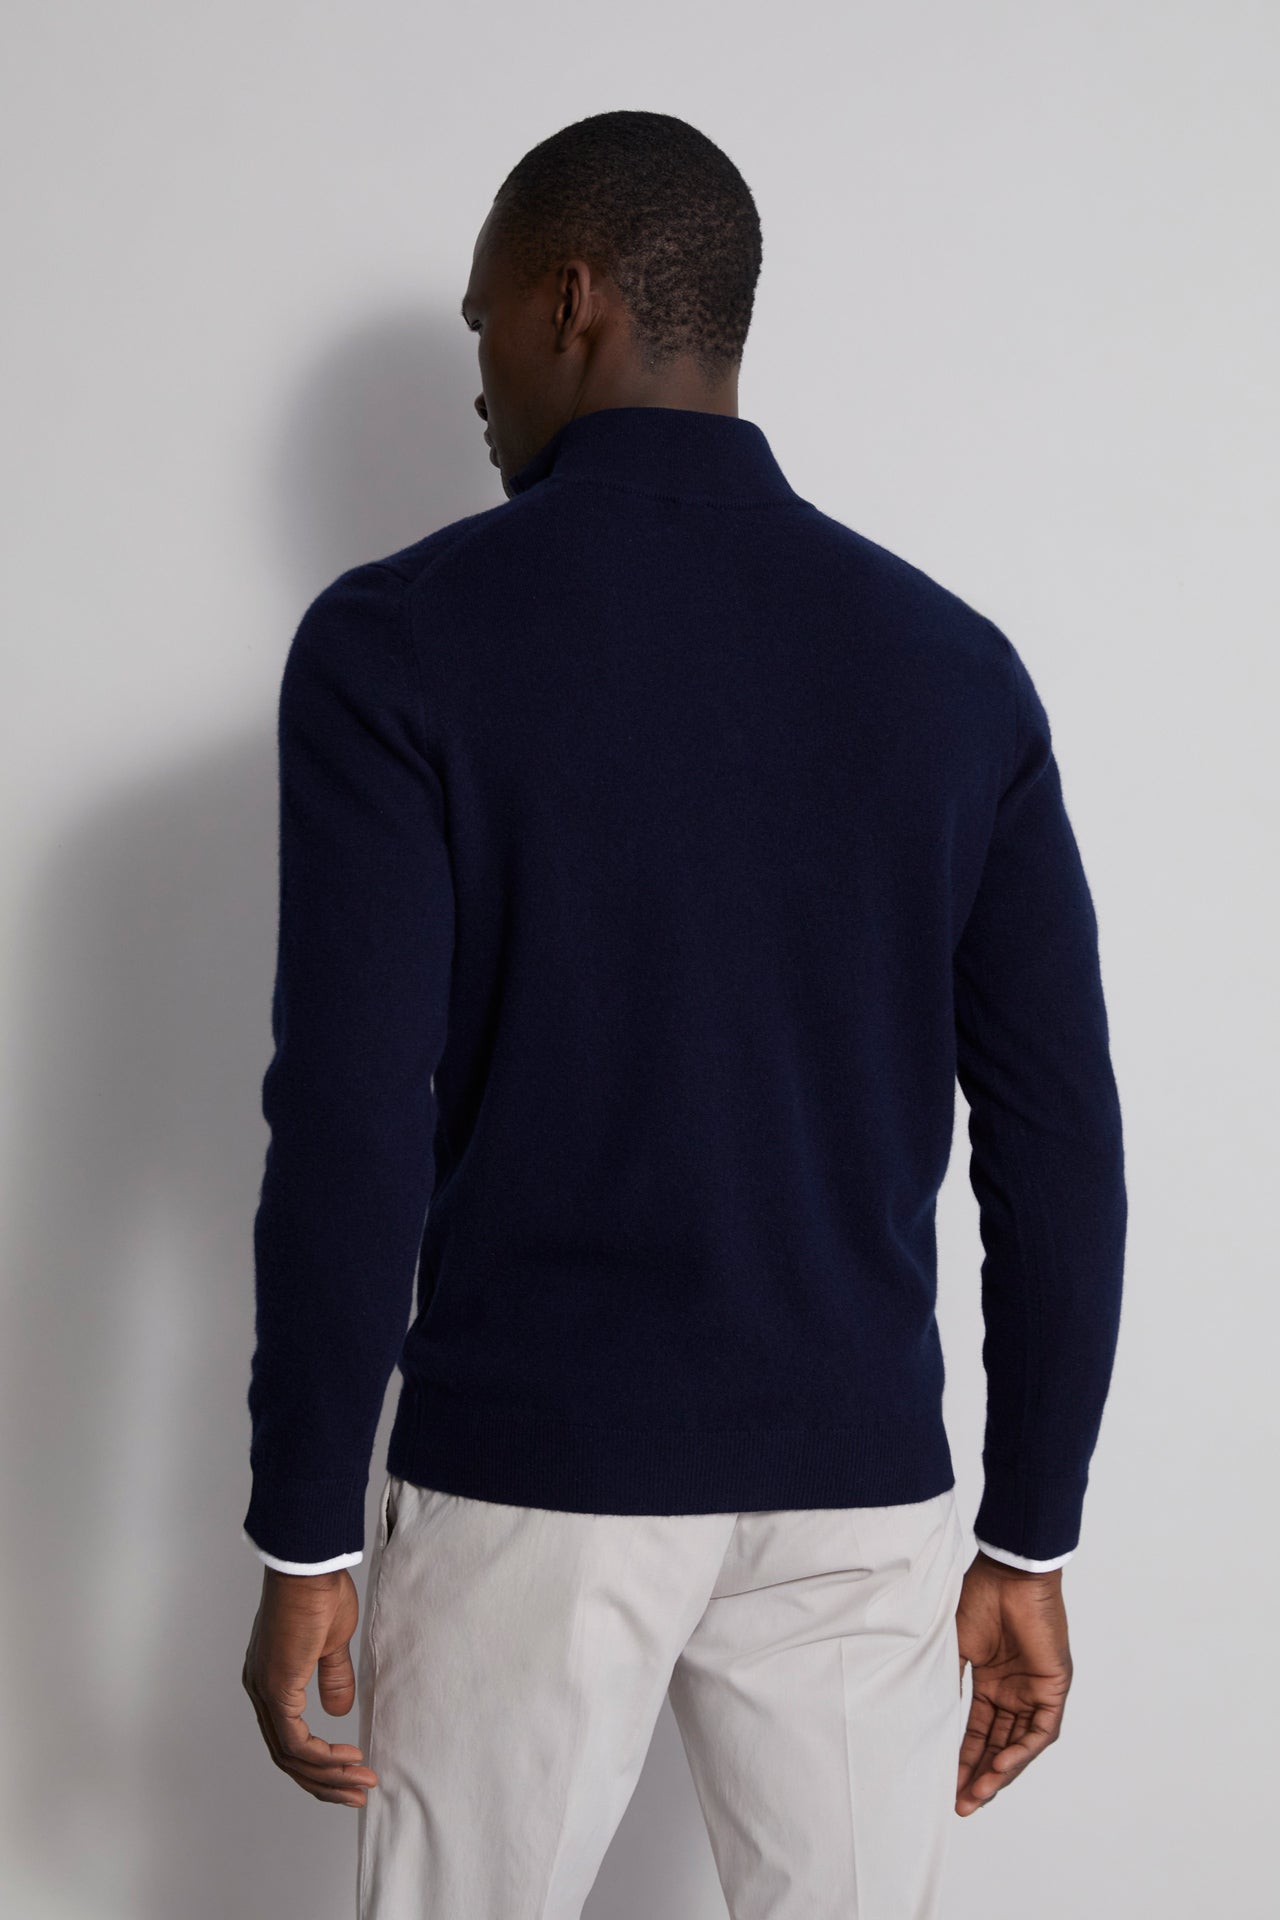 Favonio half-zipped cashmere sweater in iconic colors